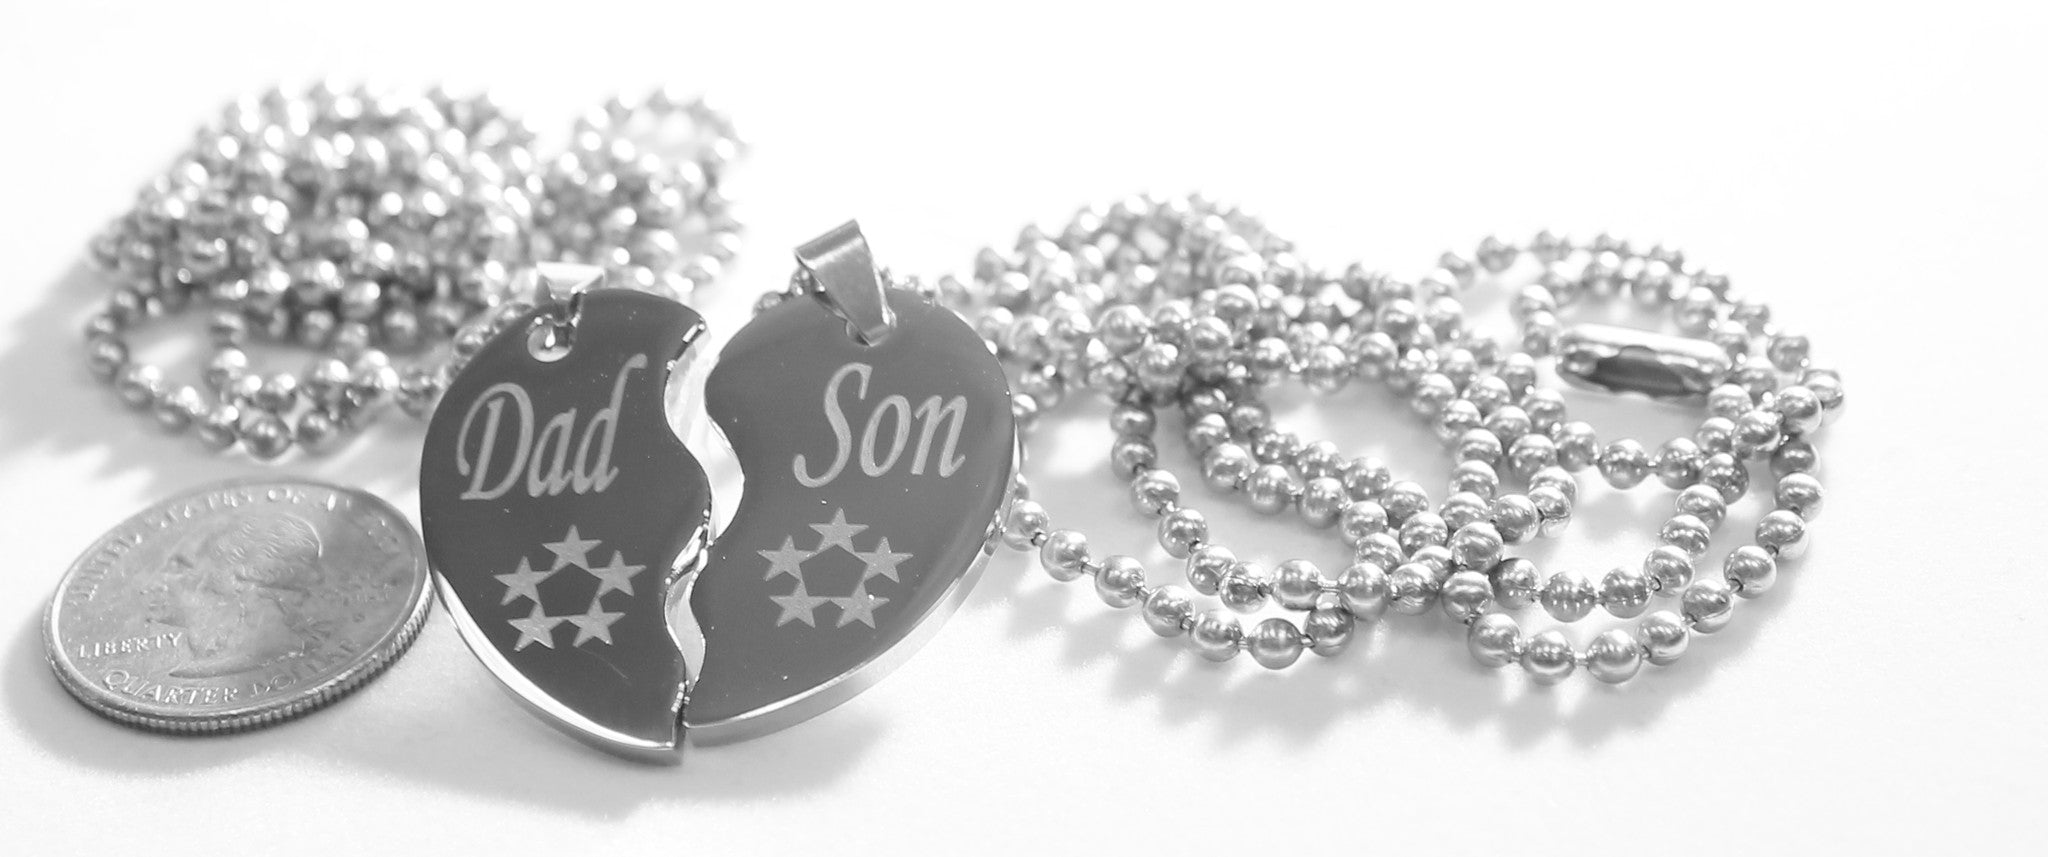 SOLID STAINLESS STEEL DAD  SON SMALL  SPLIT HEART NECKLACES LOVE FRIENDSHIP - Samstagsandmore